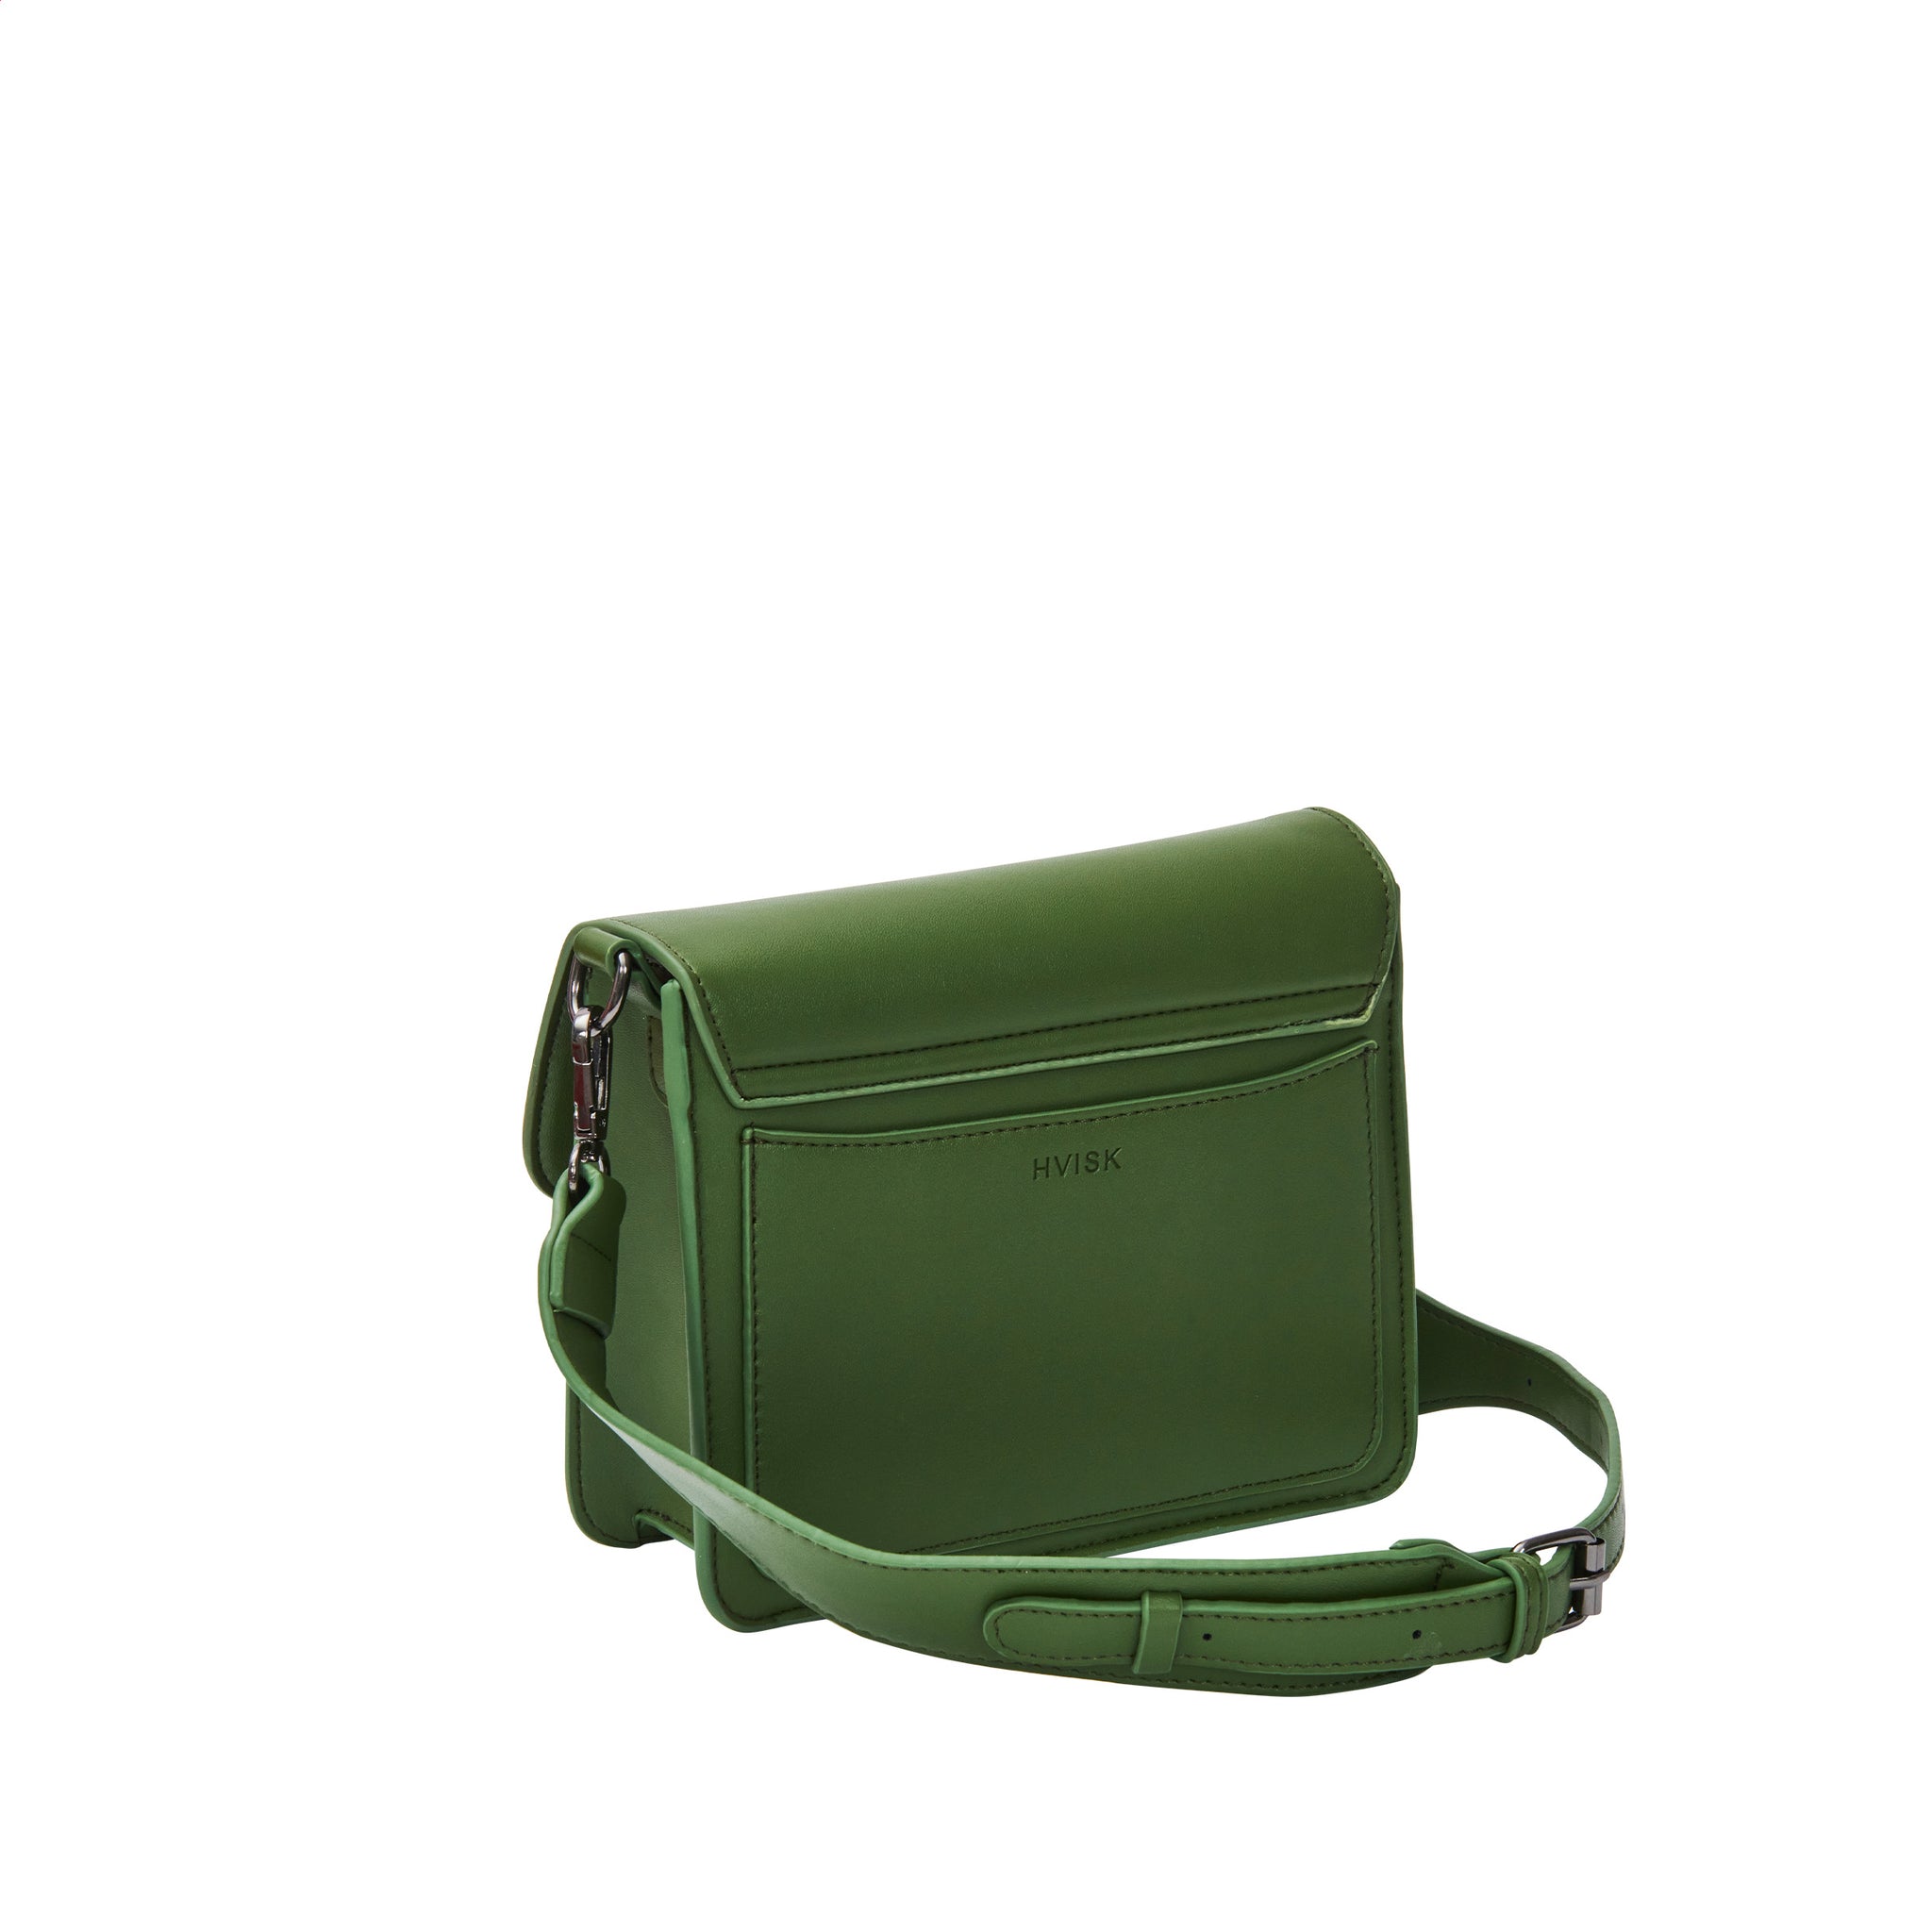 CAYMAN POCKET SOFT STRUCTURE - NATURE GREEN